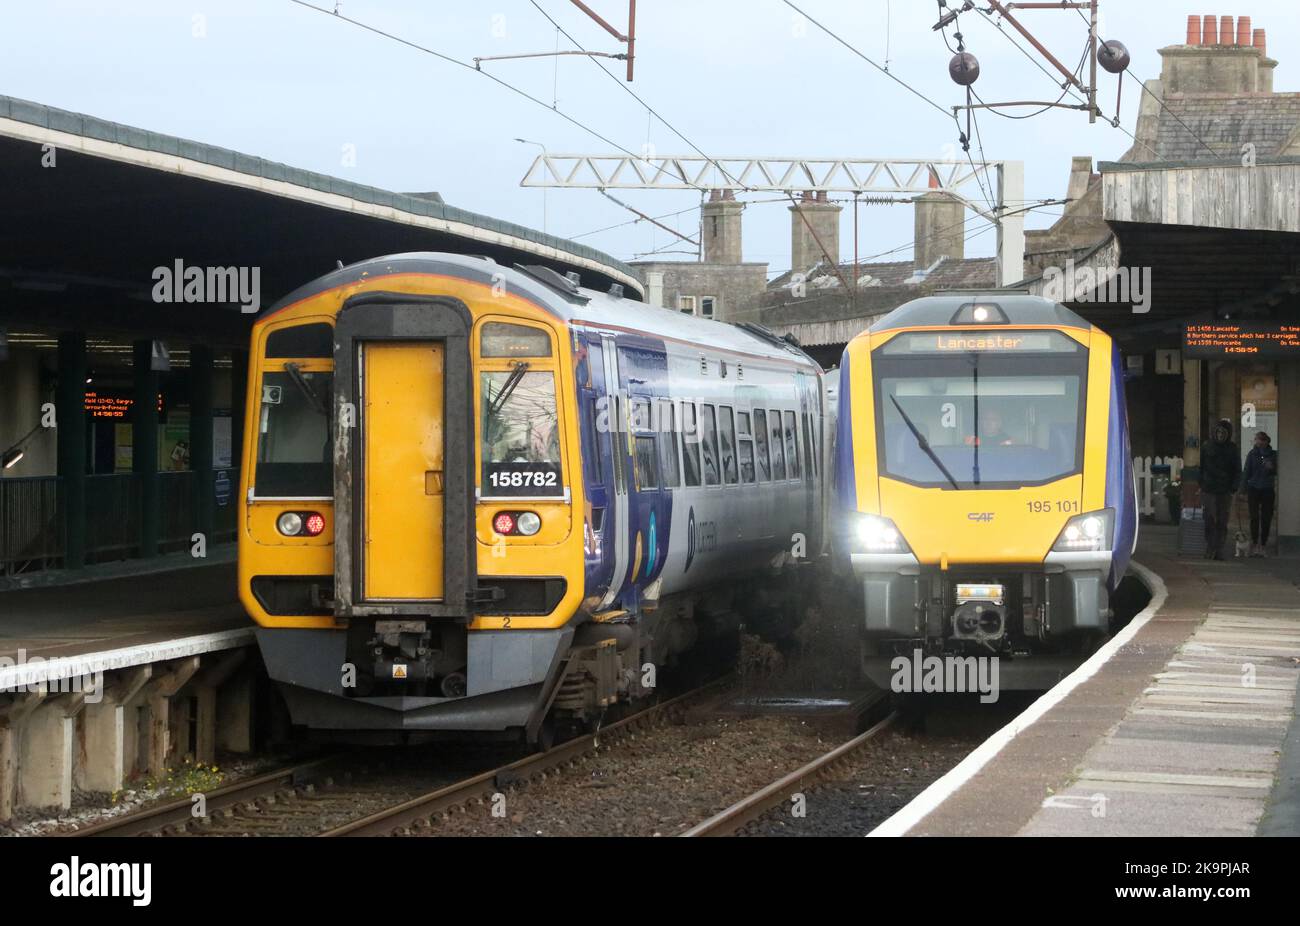 Northern trains diesel multiple units at Carnforth railway station 26th October 2022. Class 195 civity dmu and class 158 express sprinter dmu. Stock Photo